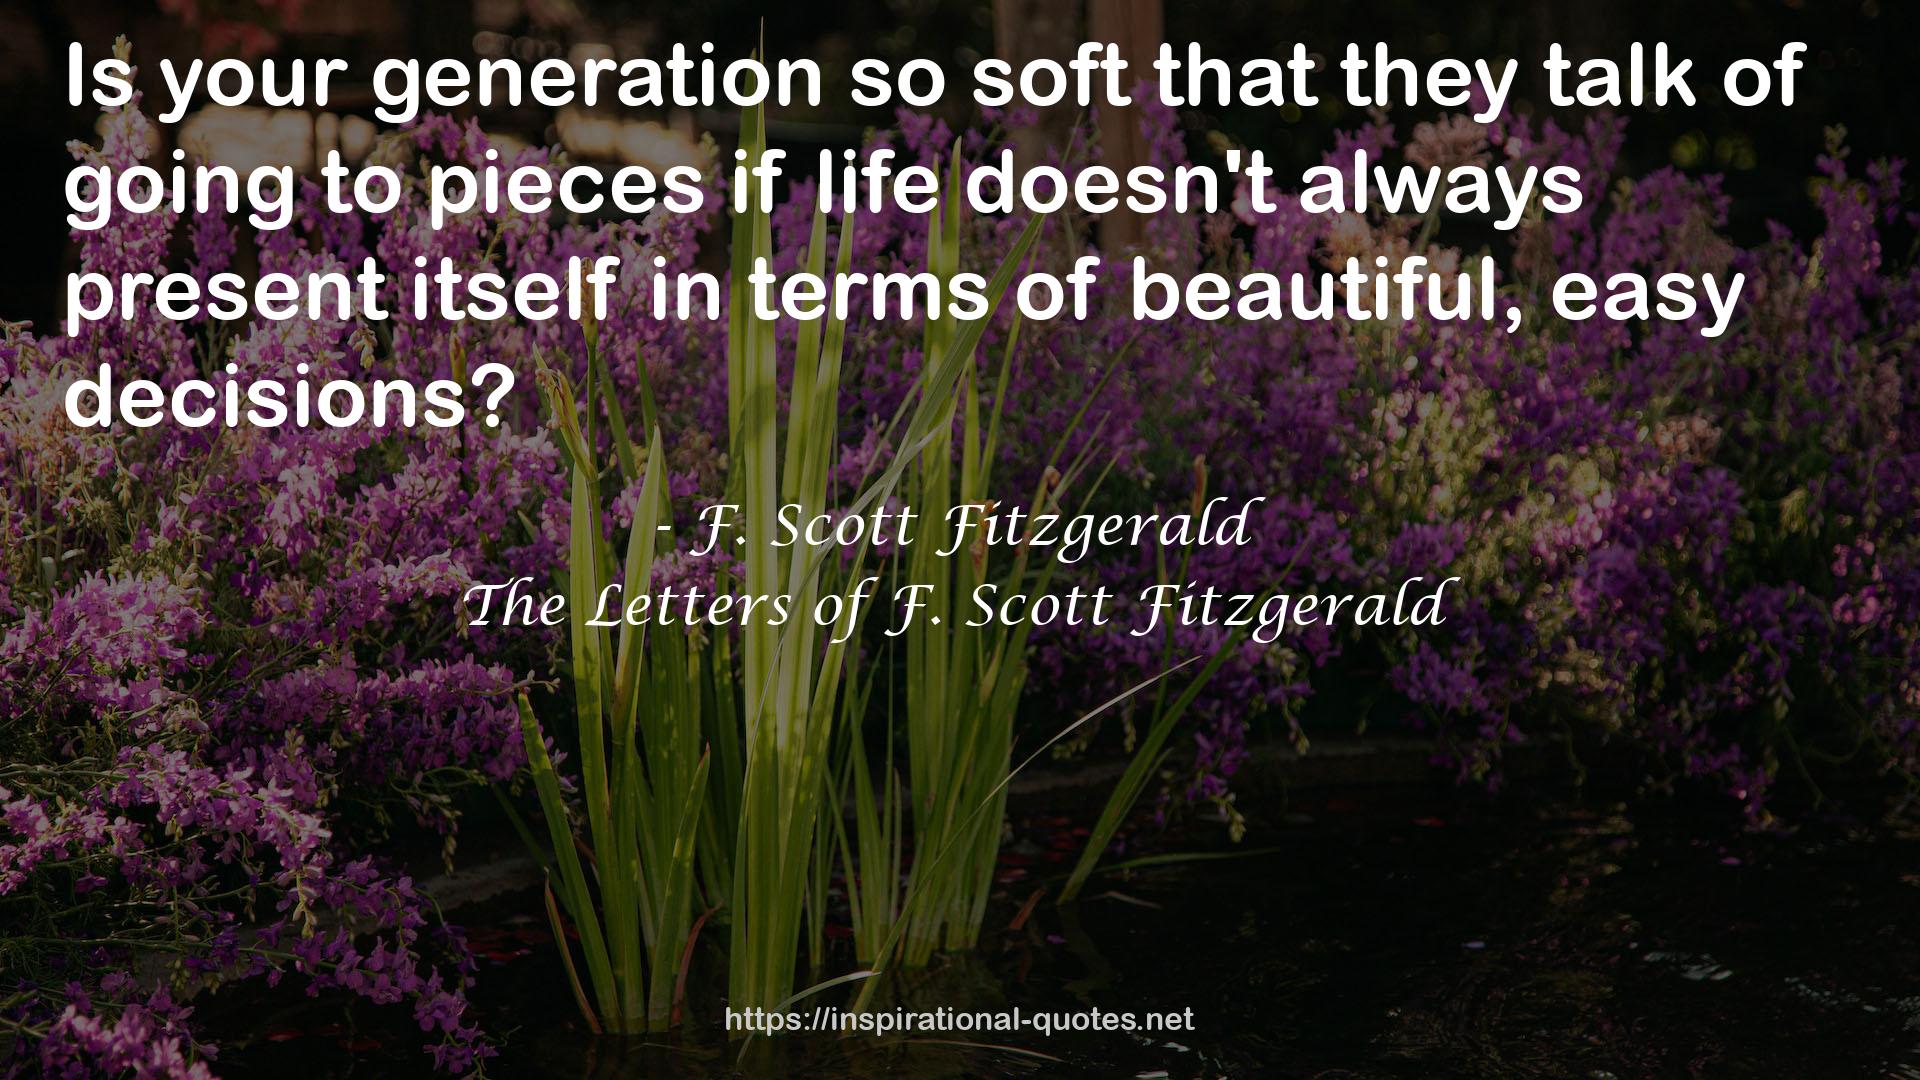 The Letters of F. Scott Fitzgerald QUOTES